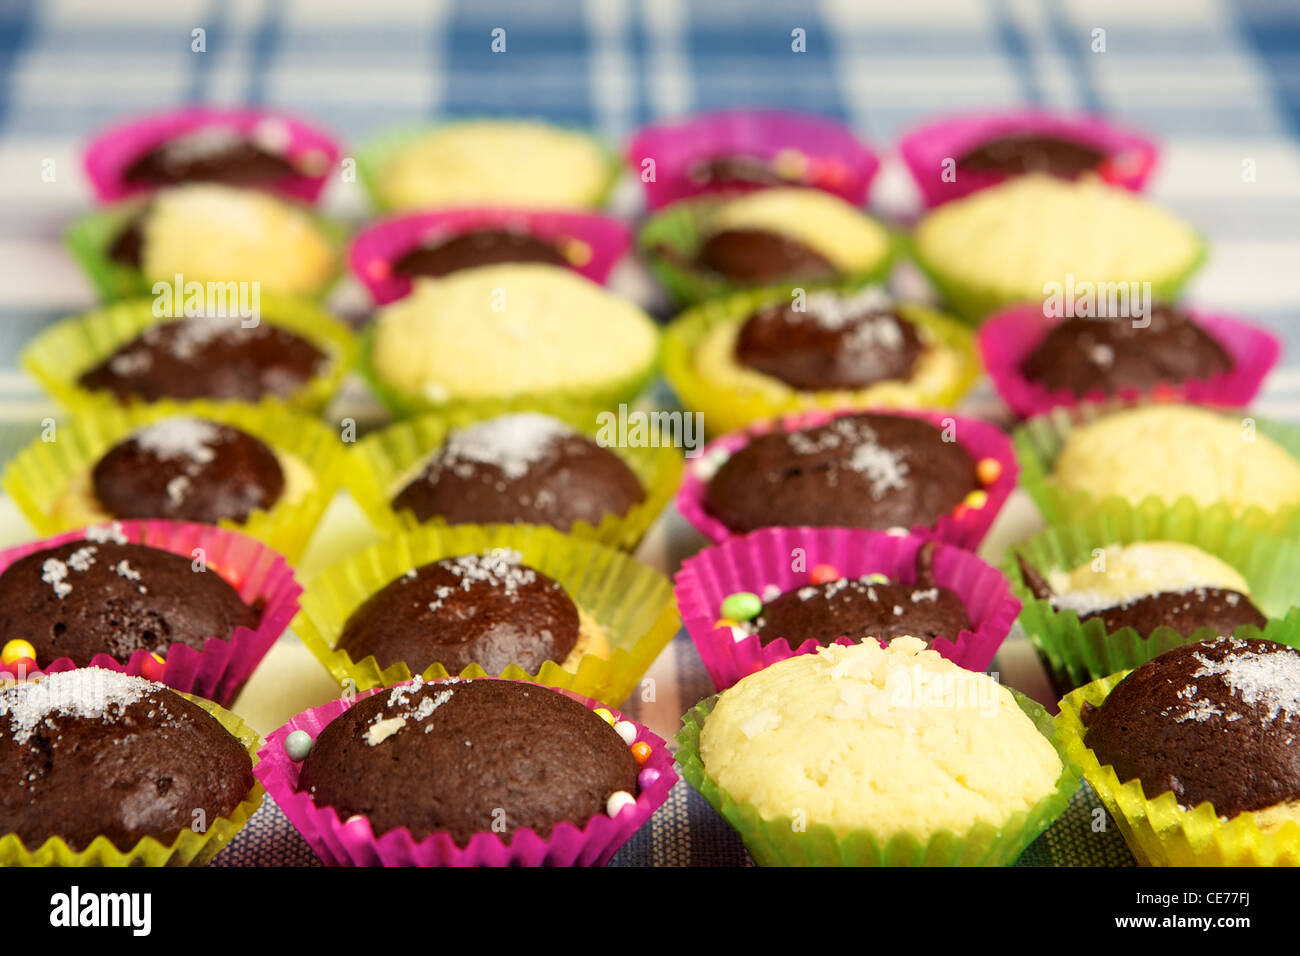 Homemade muffins on the table Stock Photo